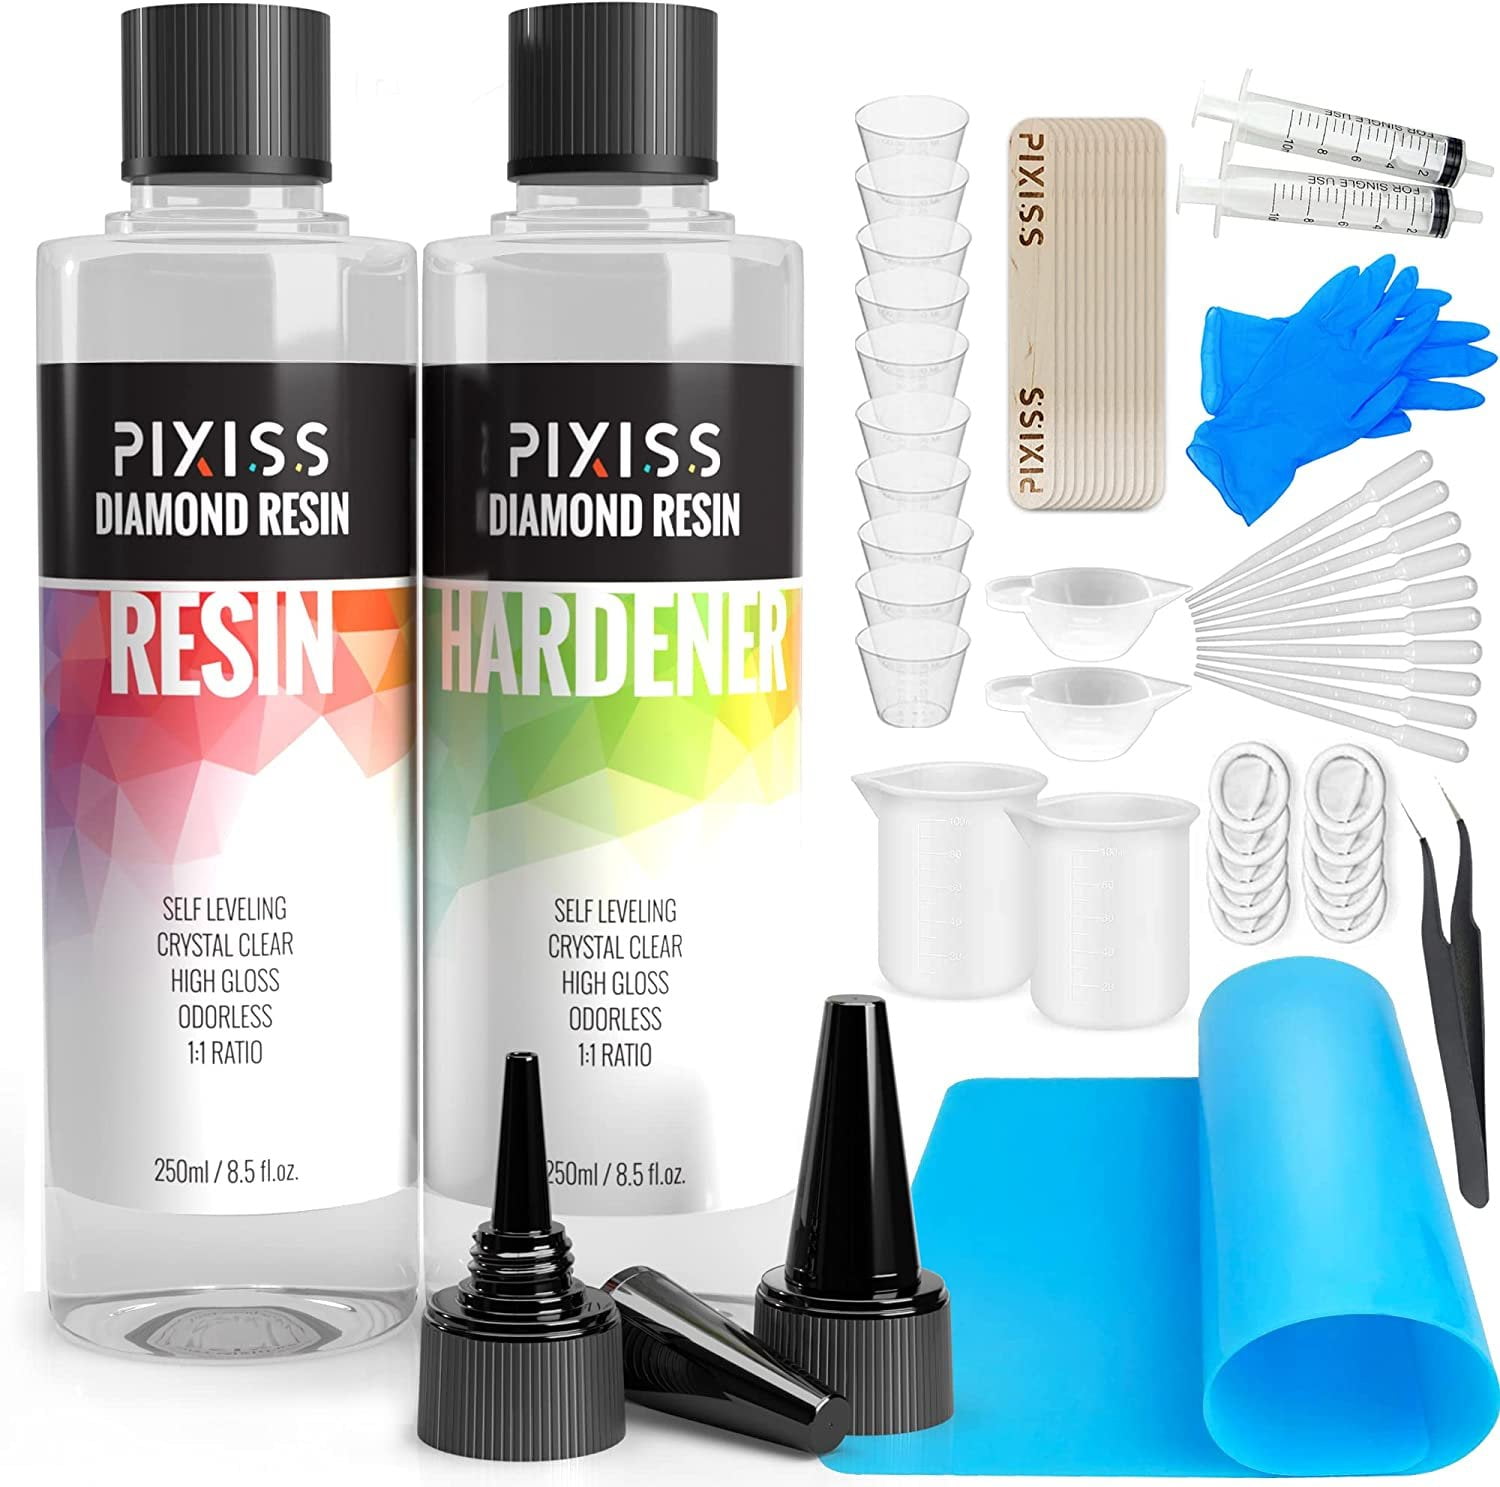 Repoxy Epoxy Resin Casting Starter Kit - Resin Jewelry Making Kit - Art  Supplies Resin Charms - Molds - Dyes - Glitters - Tools 